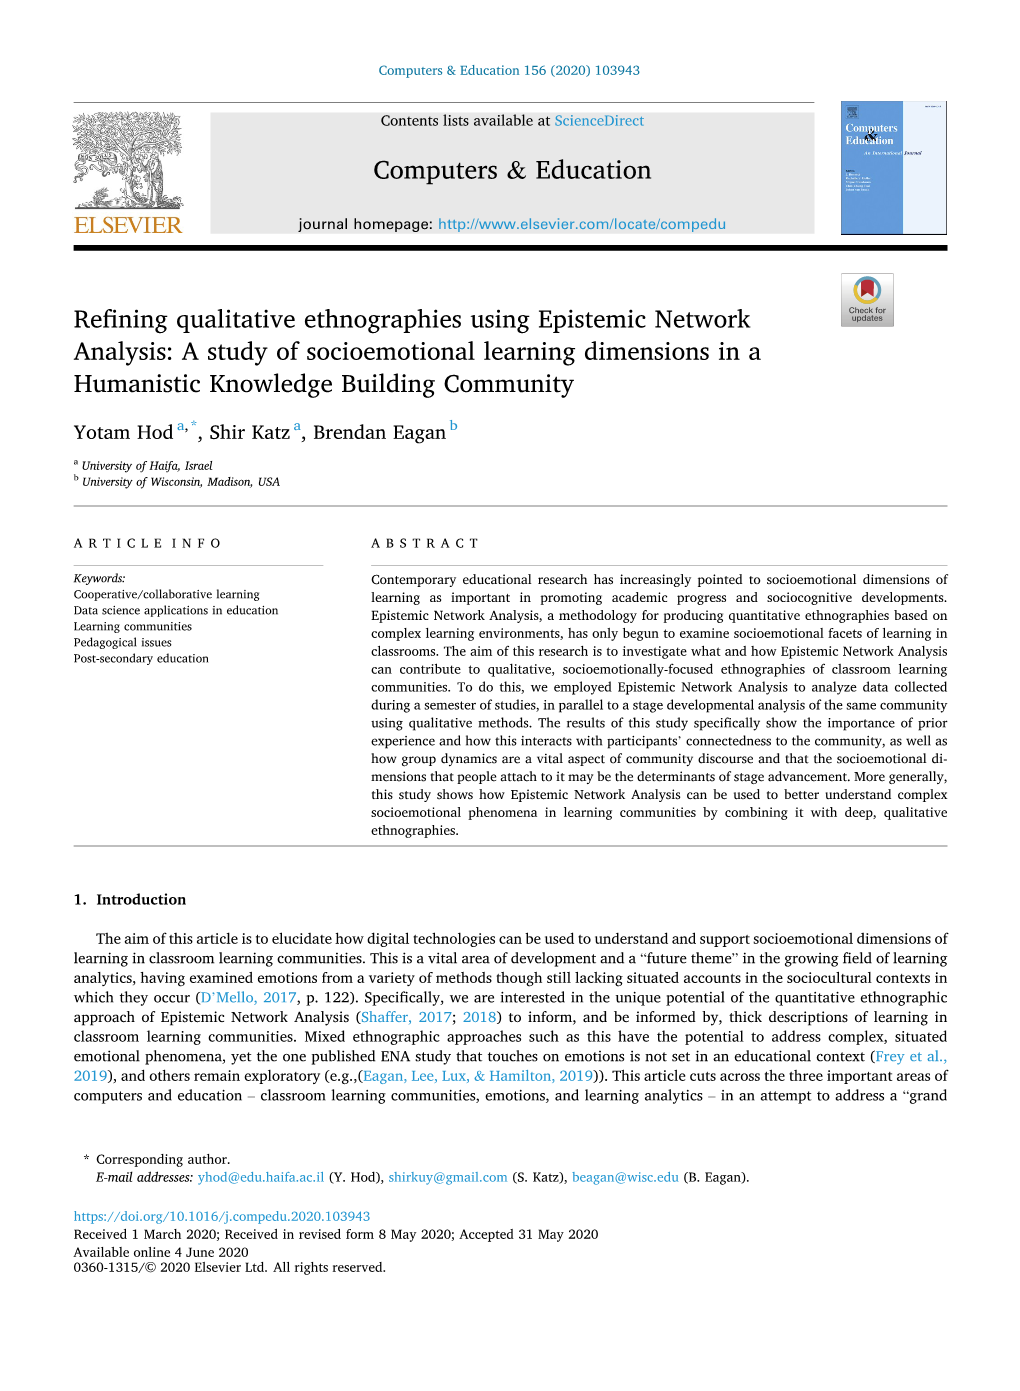 Refining Qualitative Ethnographies Using Epistemic Network Analysis: a Study of Socioemotional Learning Dimensions in a Humanistic Knowledge Building Community